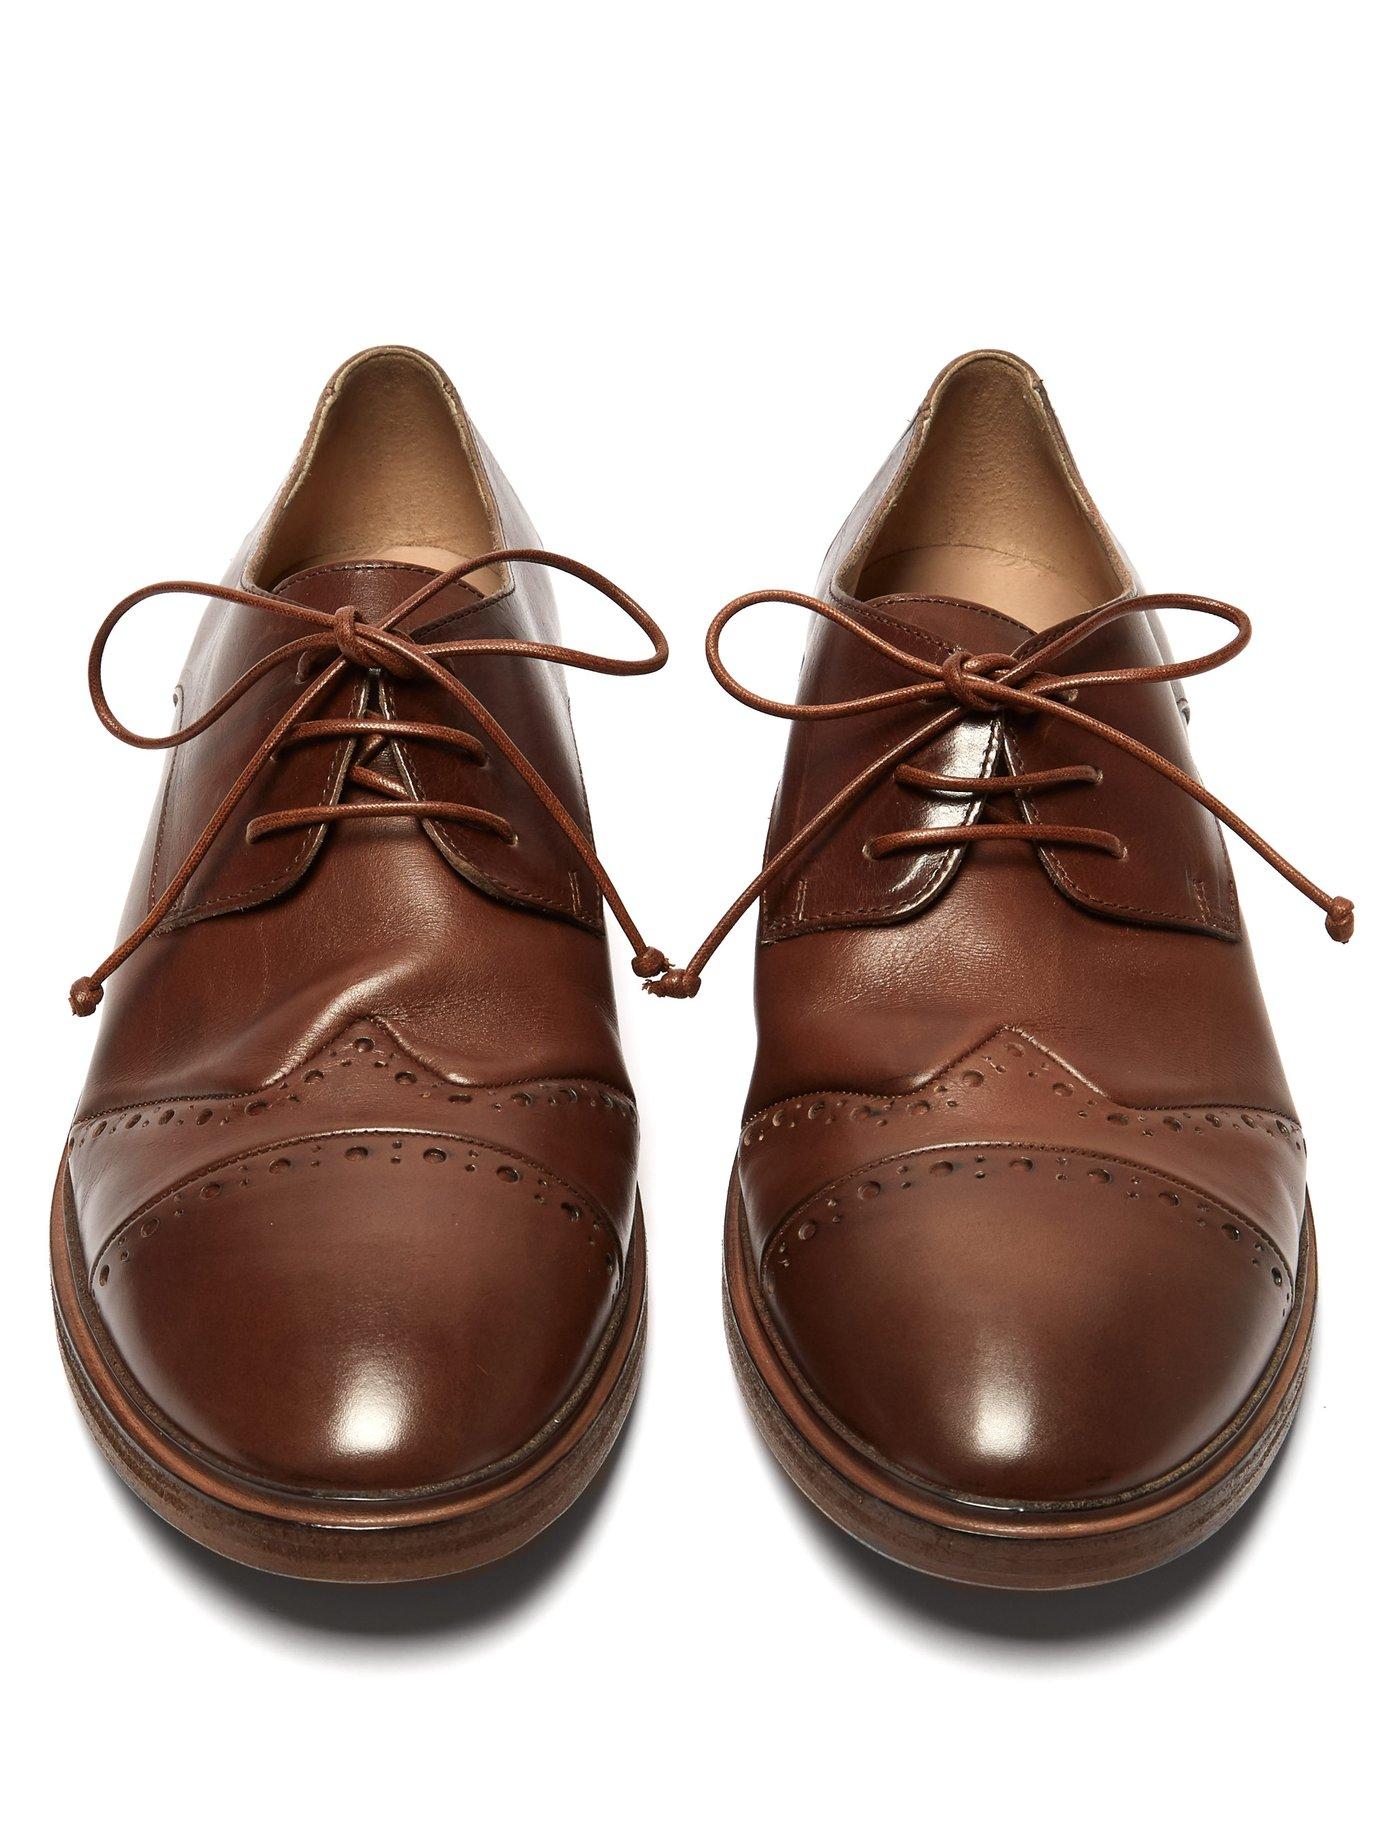 Marsèll Sdendone Leather Derby Shoes in Brown for Men - Lyst